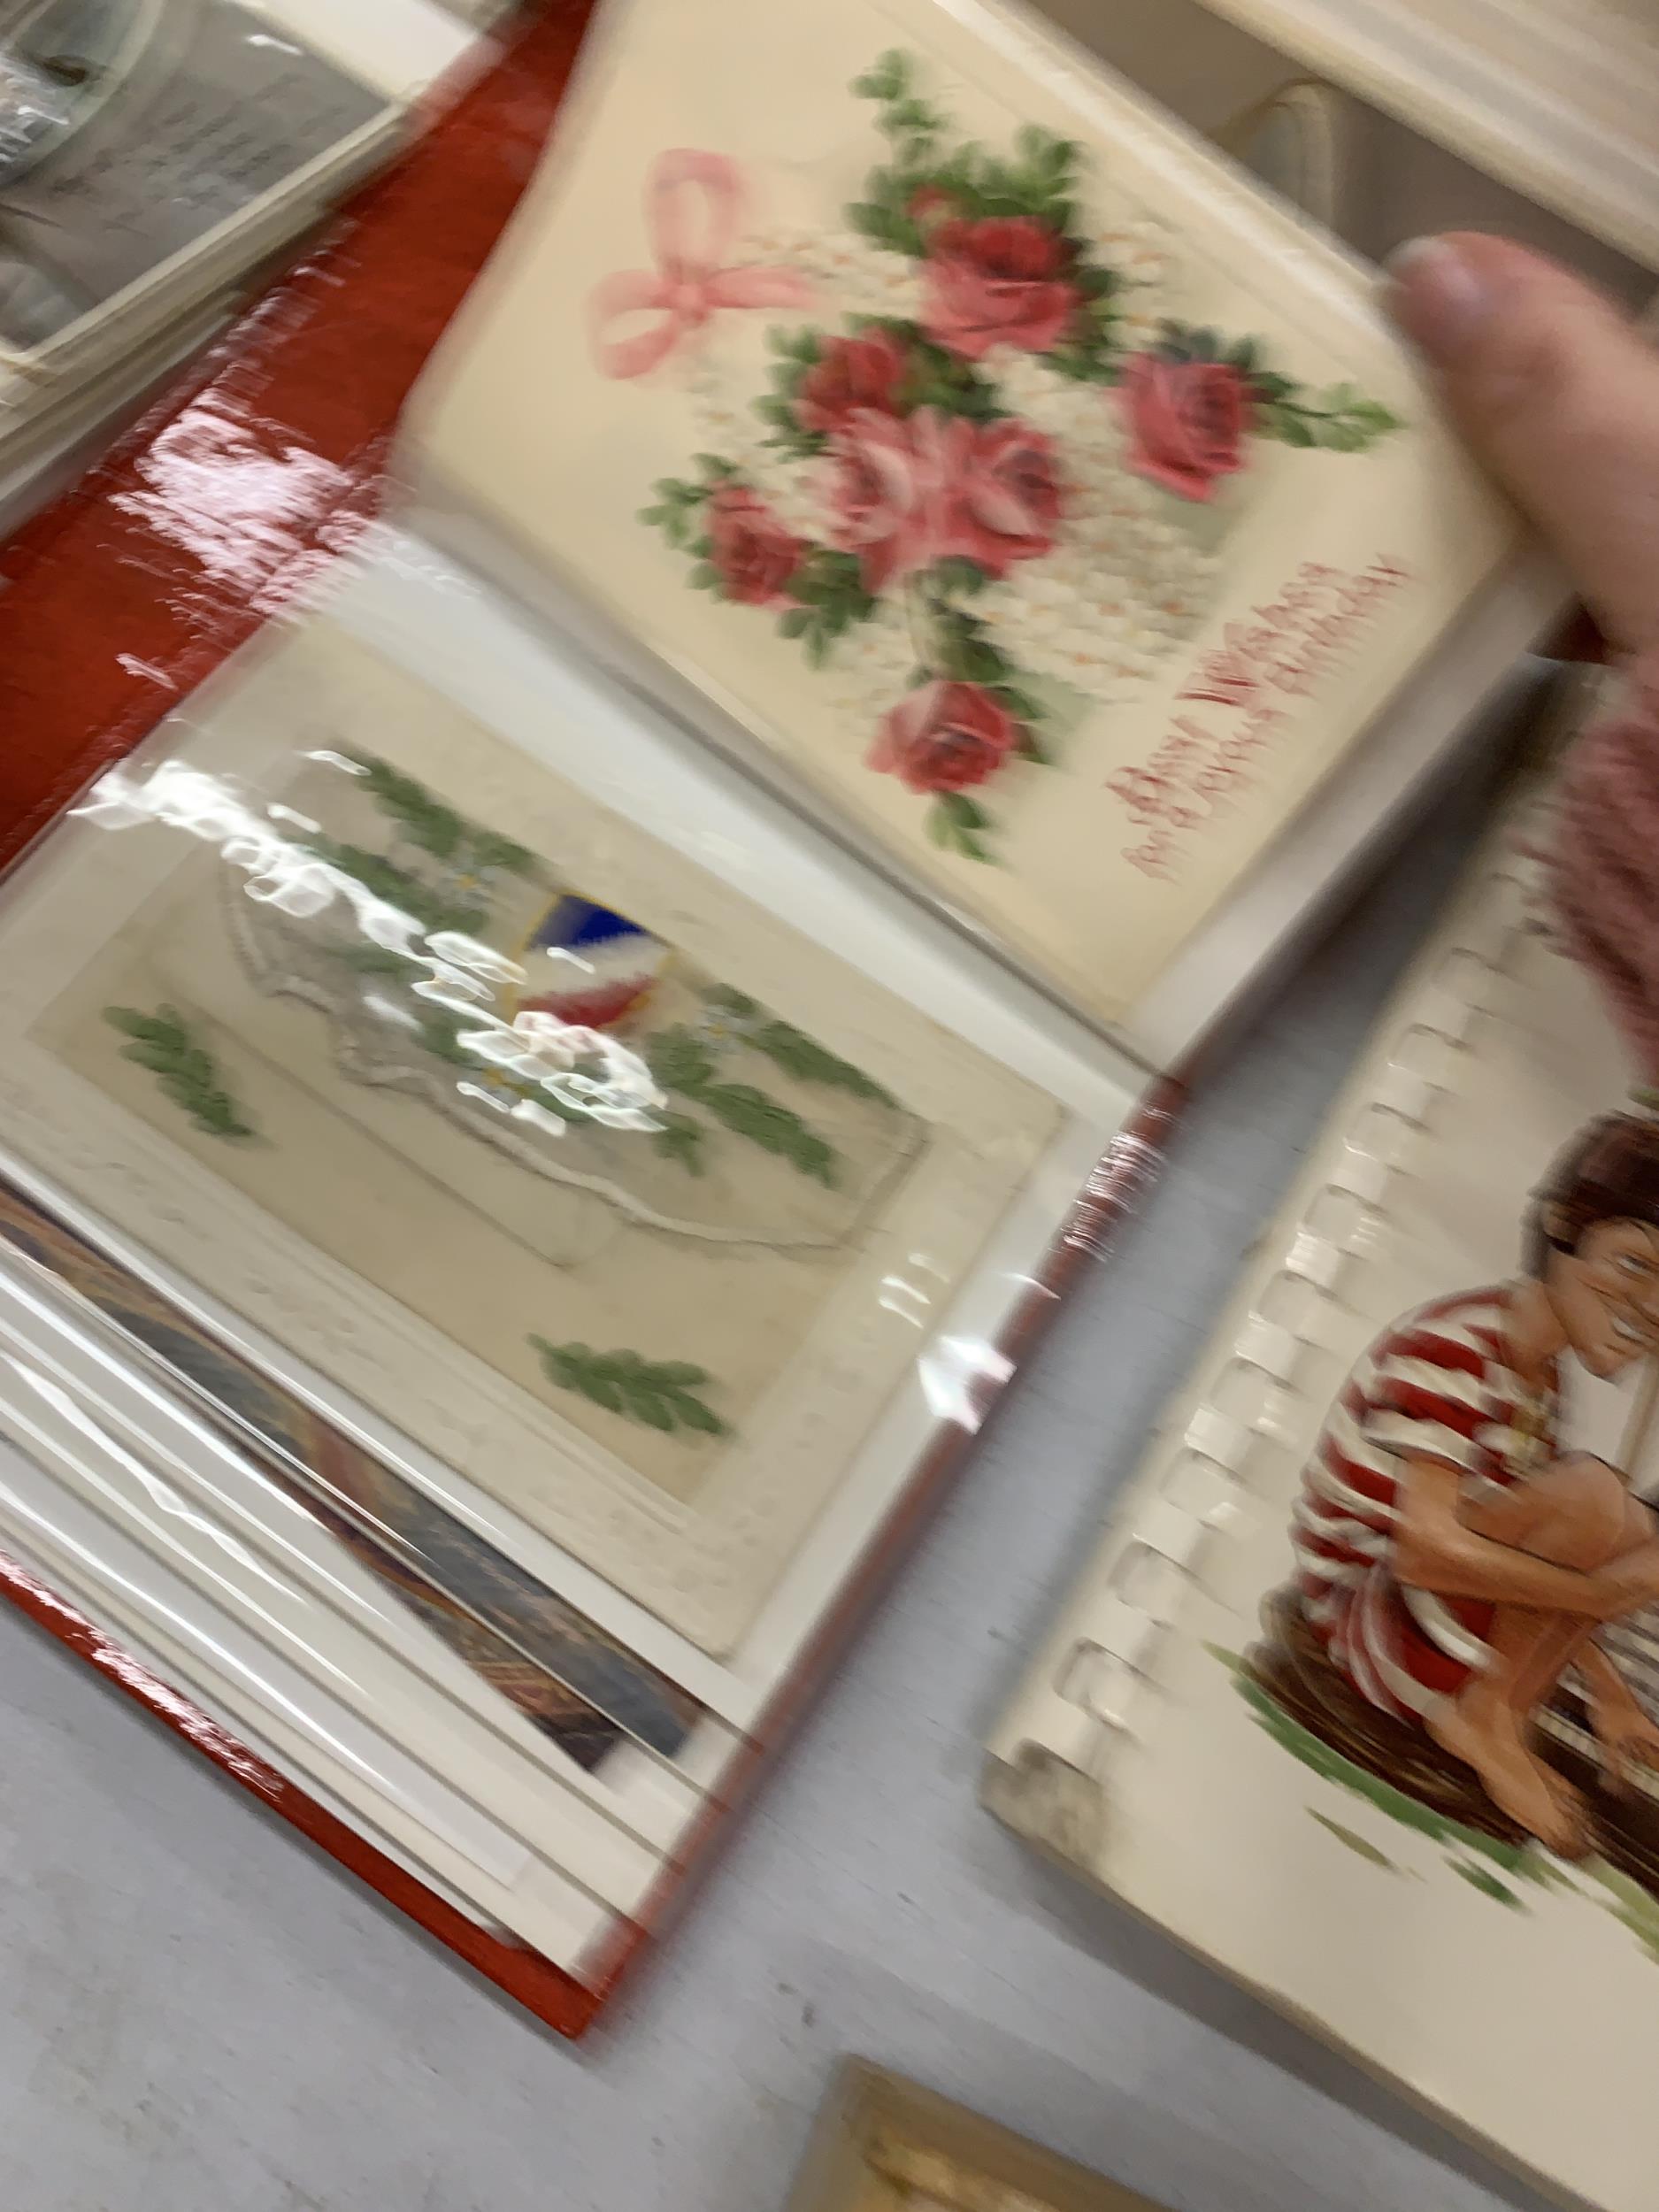 A PHOTO ALBUM CONTAINING VINTAGE POSTCARDS AND GREETINS CARDS, SOME HAND EMBROIDERED - Image 5 of 7